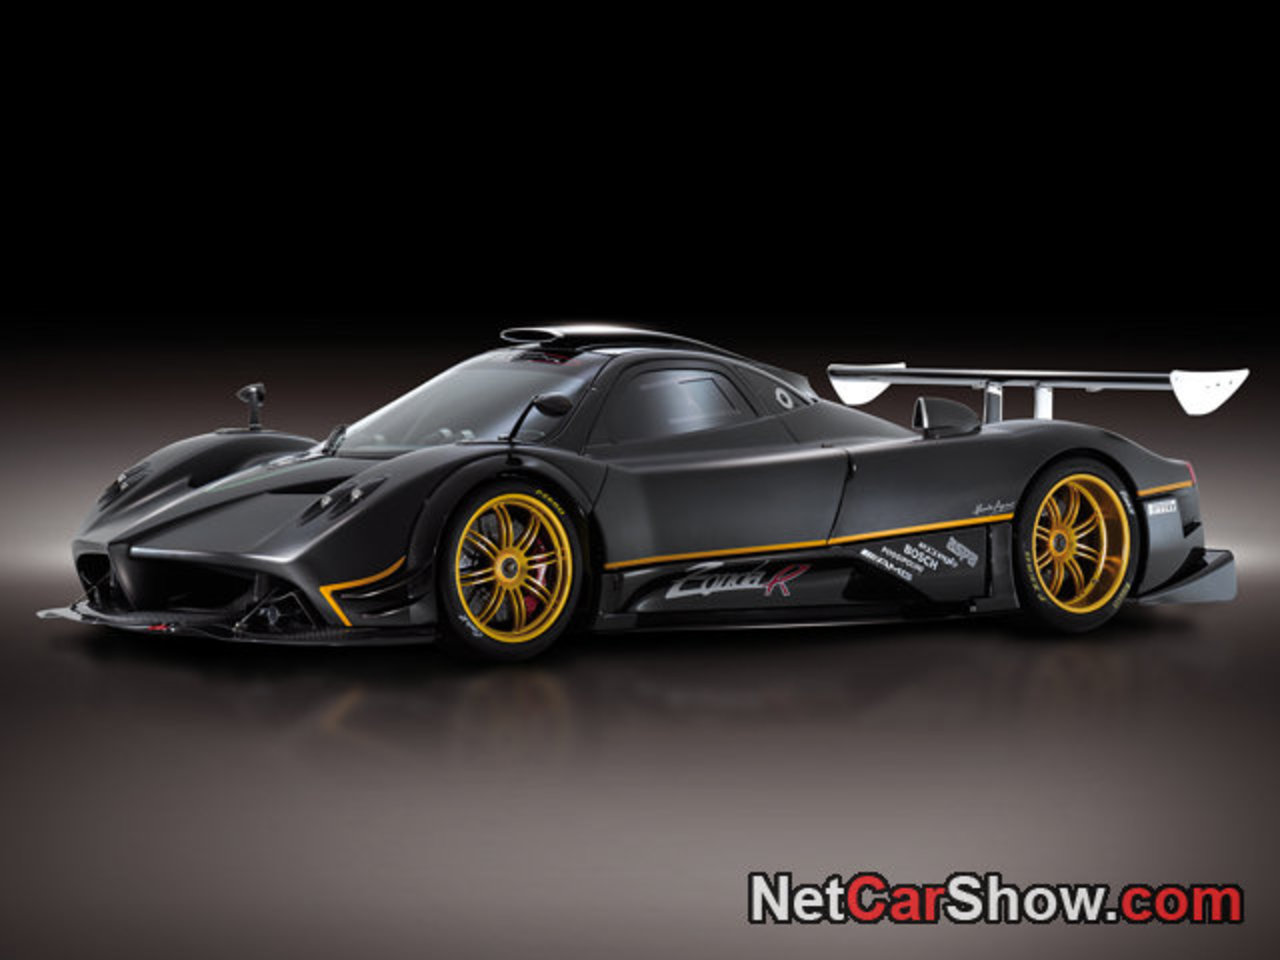 Pagani Zonda R picture # 03 of 61, Front Angle, MY 2009, 1280x960